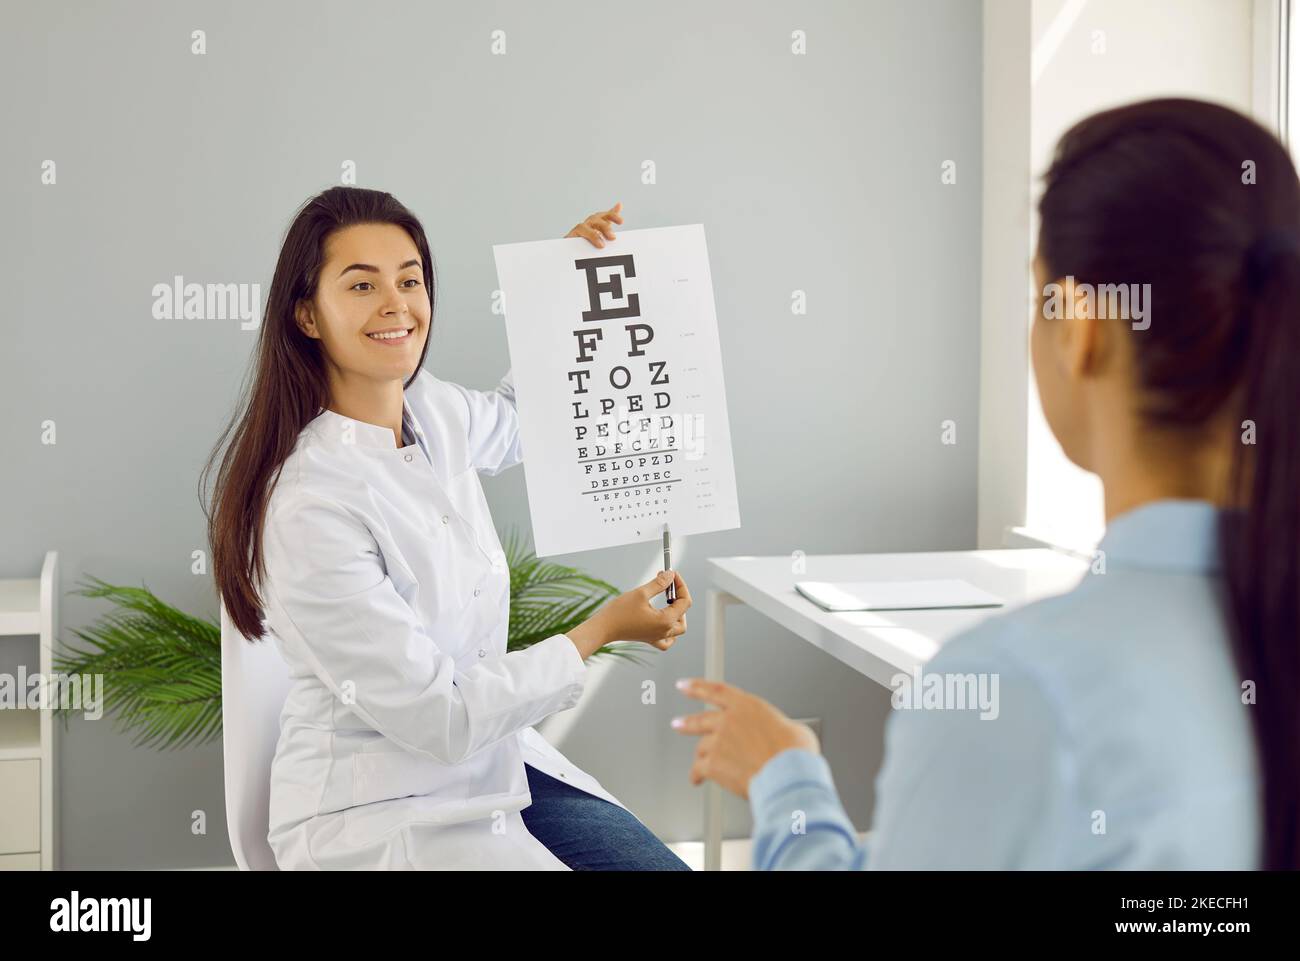 Ophthalmologist checks woman's eyesight by pointing to small letters on chart for vision test. Stock Photo